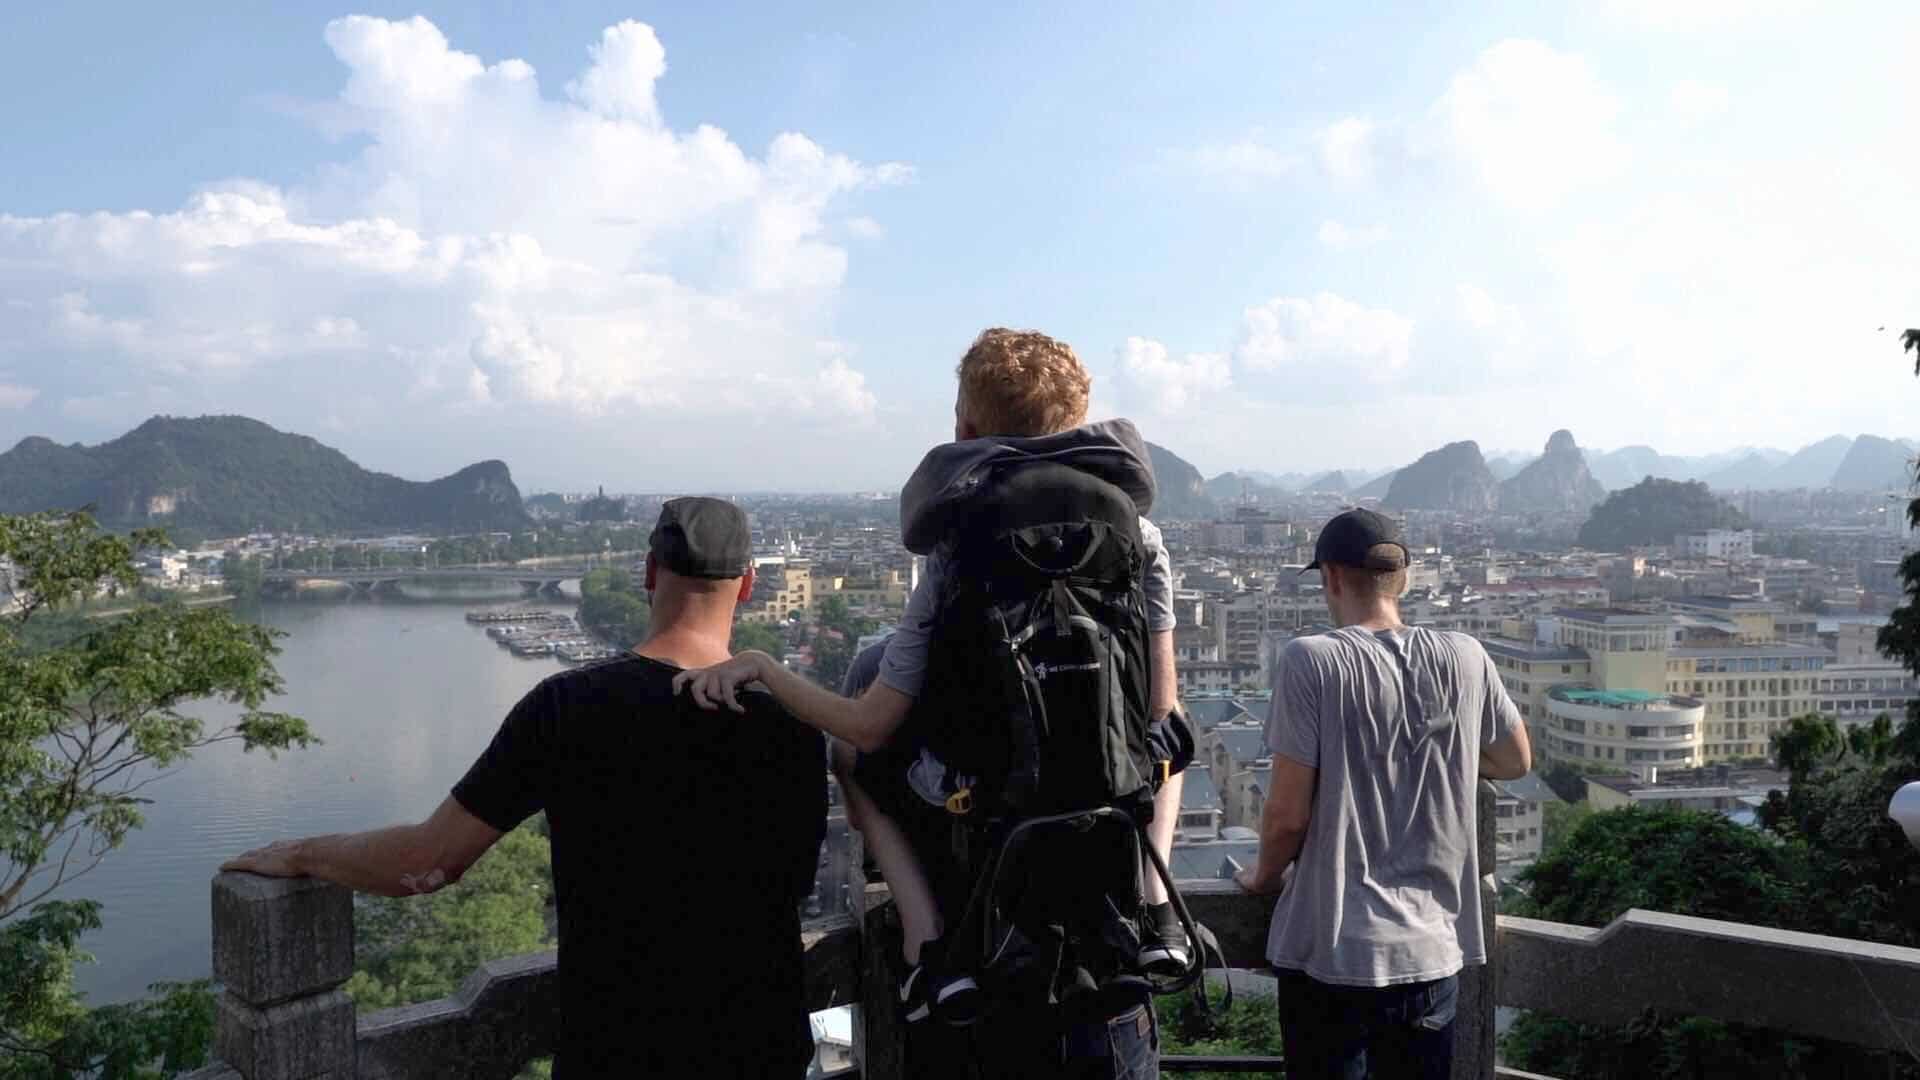 Four young men looking out over a European city on a river. One of the men is in a backpack on the back of the man in the middle. 